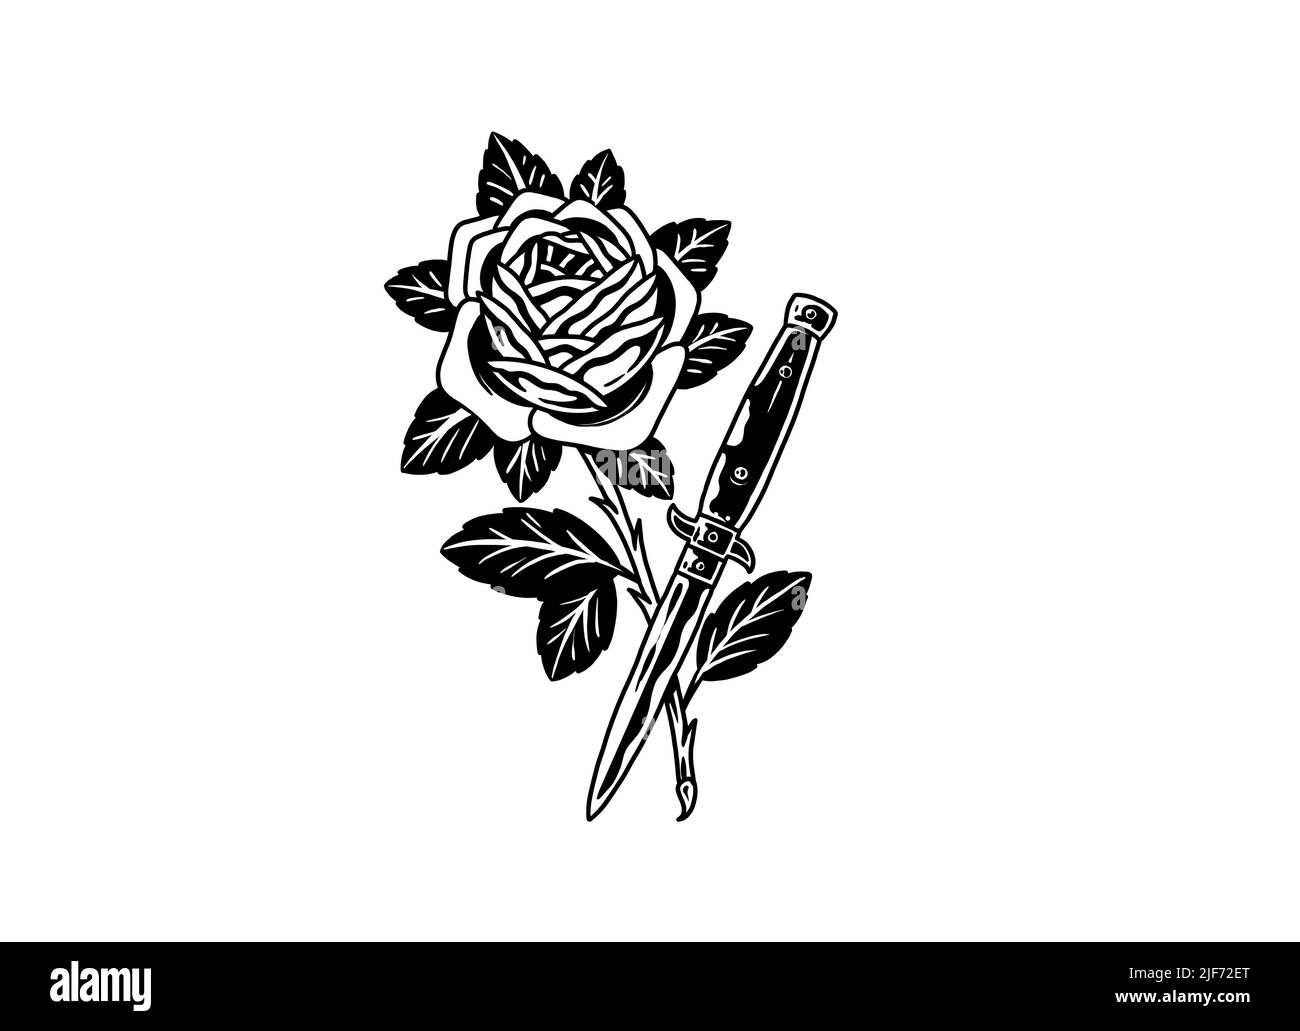 Old school tattoo style graphic design drawing rose and sword knife Stock Photo